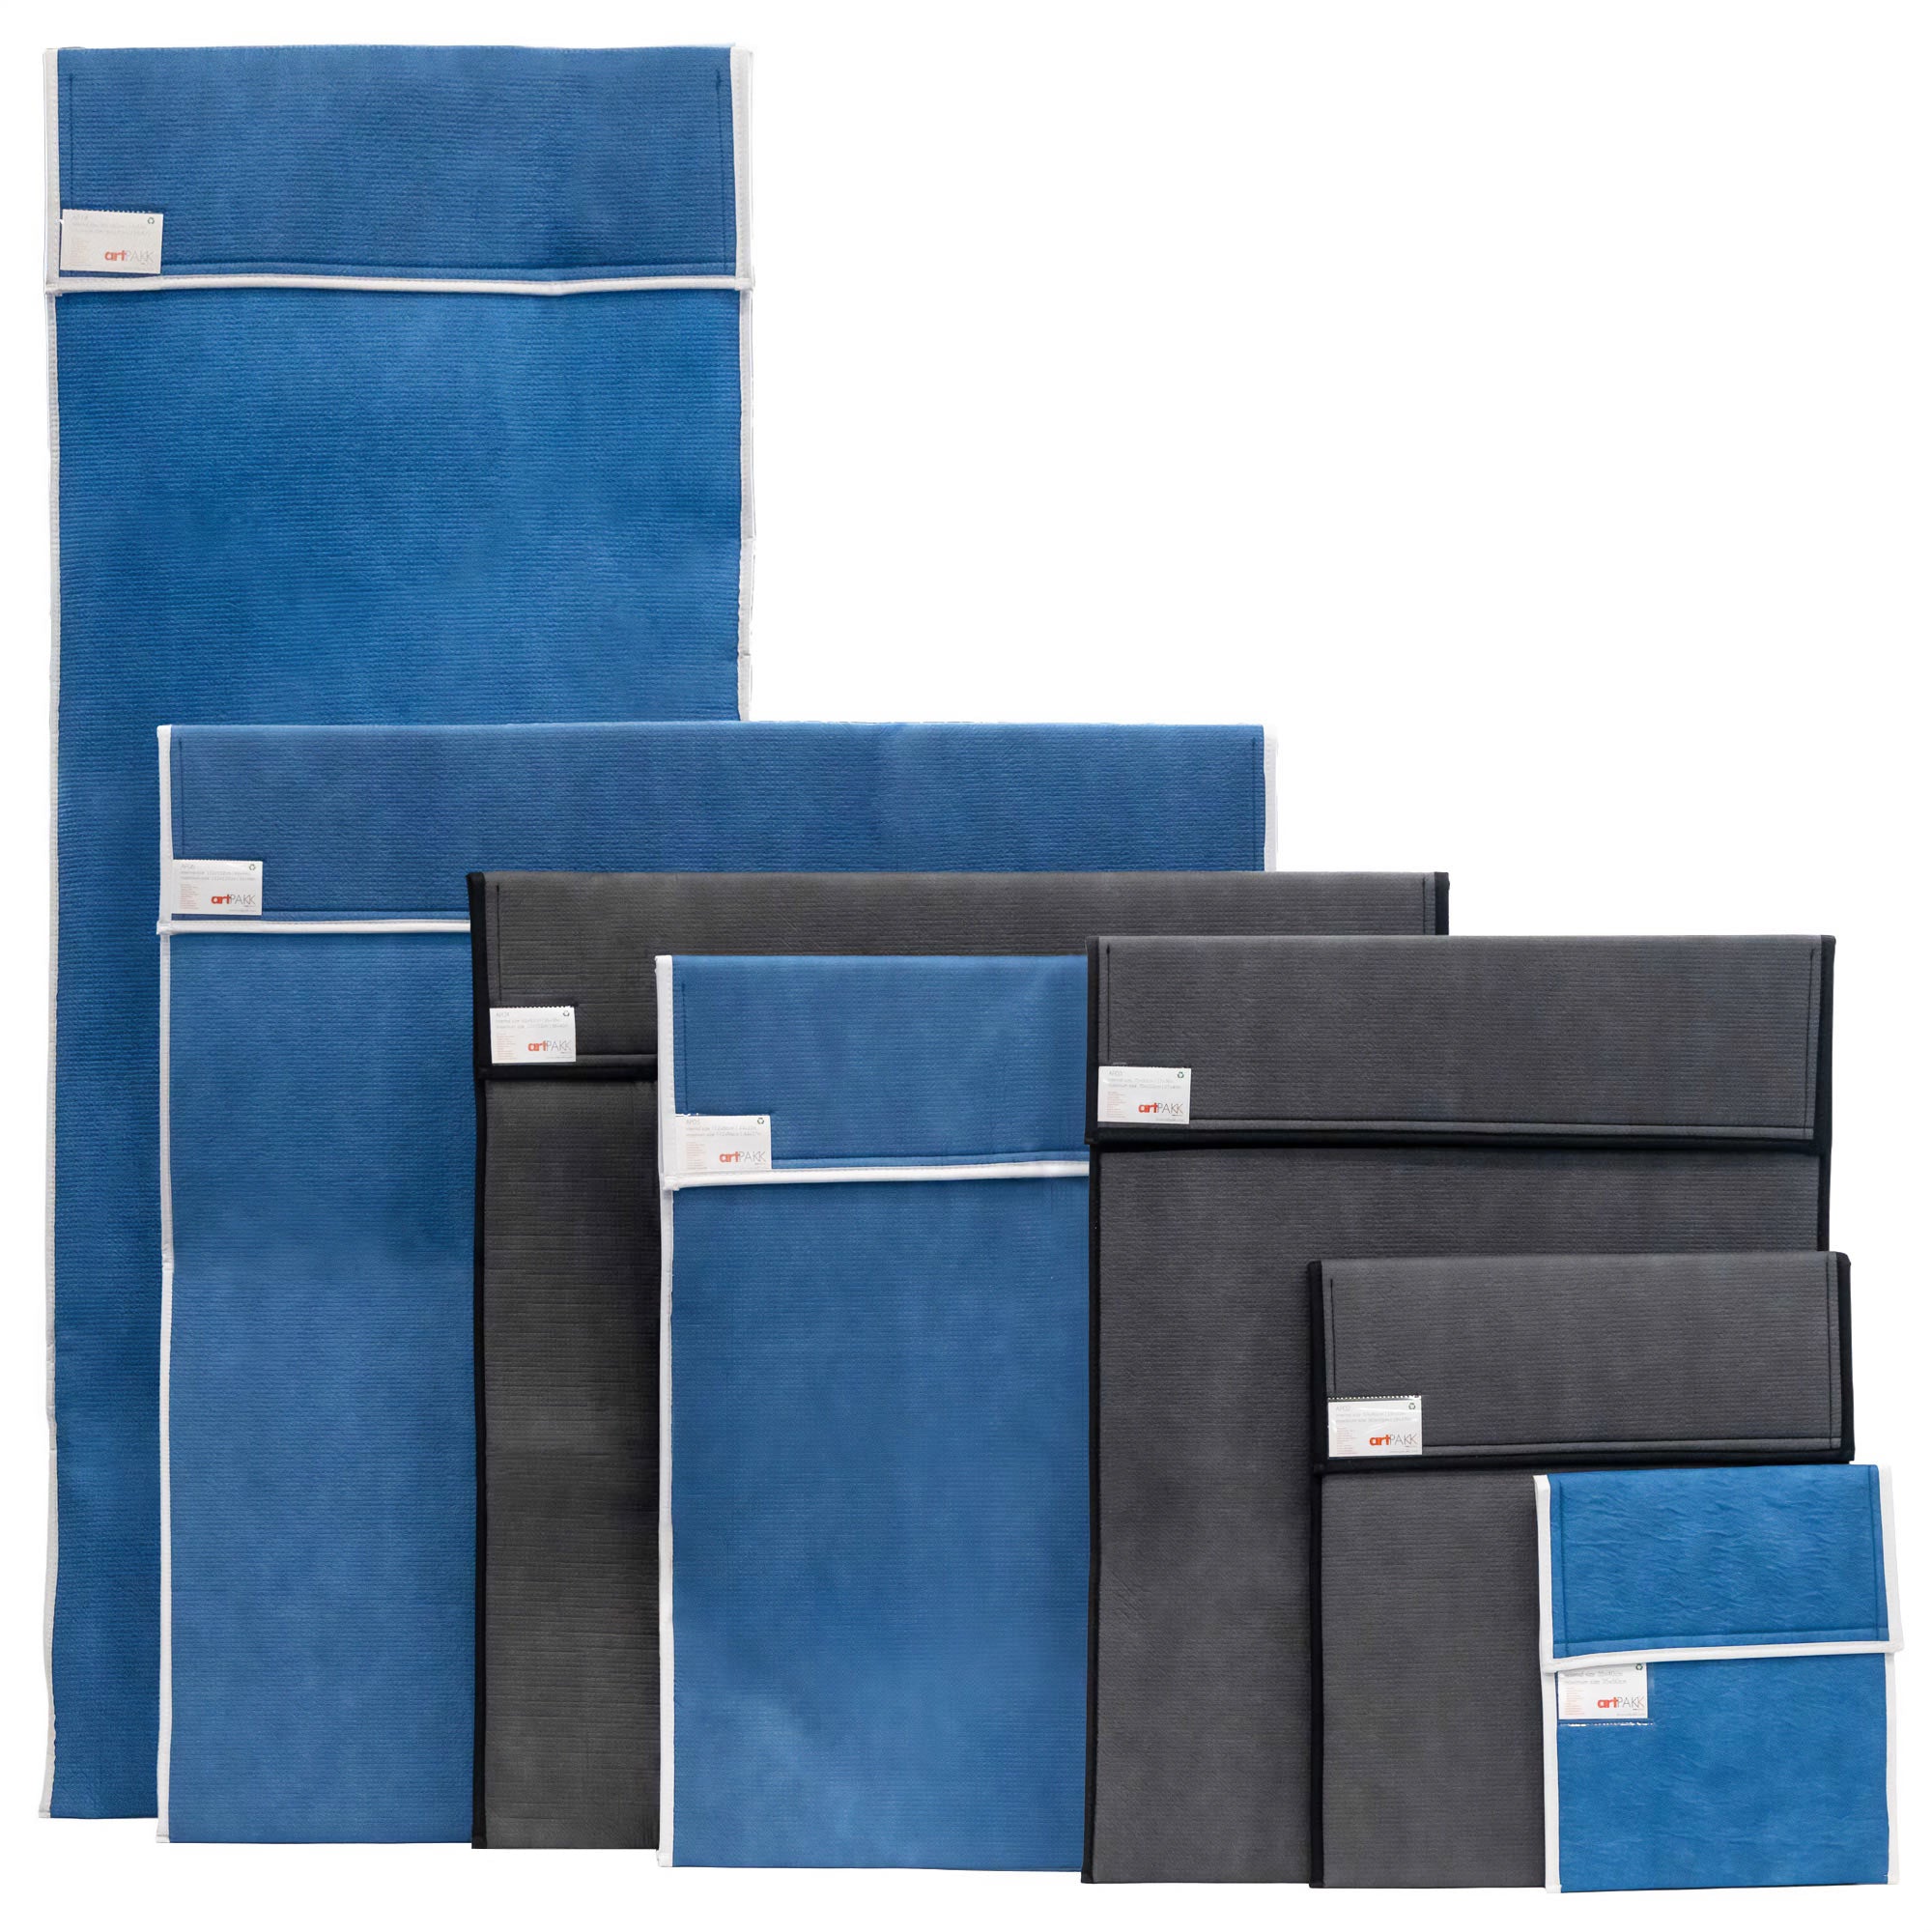 ARTPAKK - Protective Artbag for Art Works and Frames - Available in Both Blue and Grey